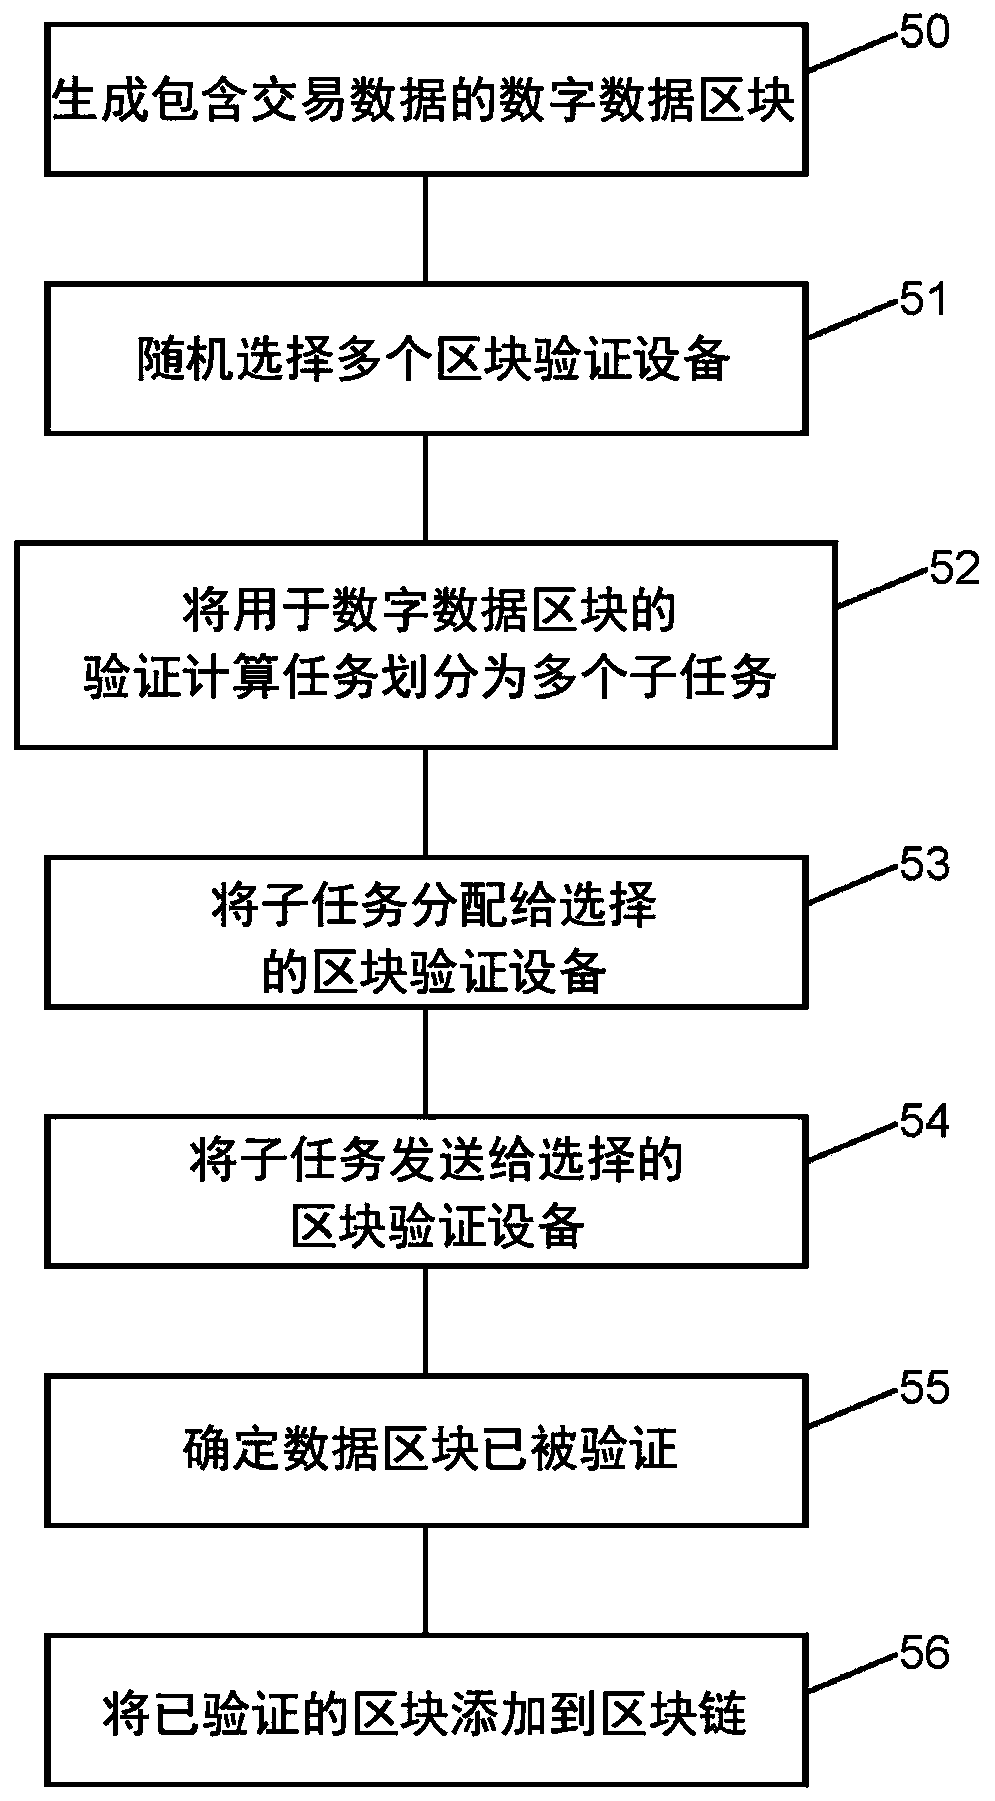 Method for processing data and apparatuses for implementing same